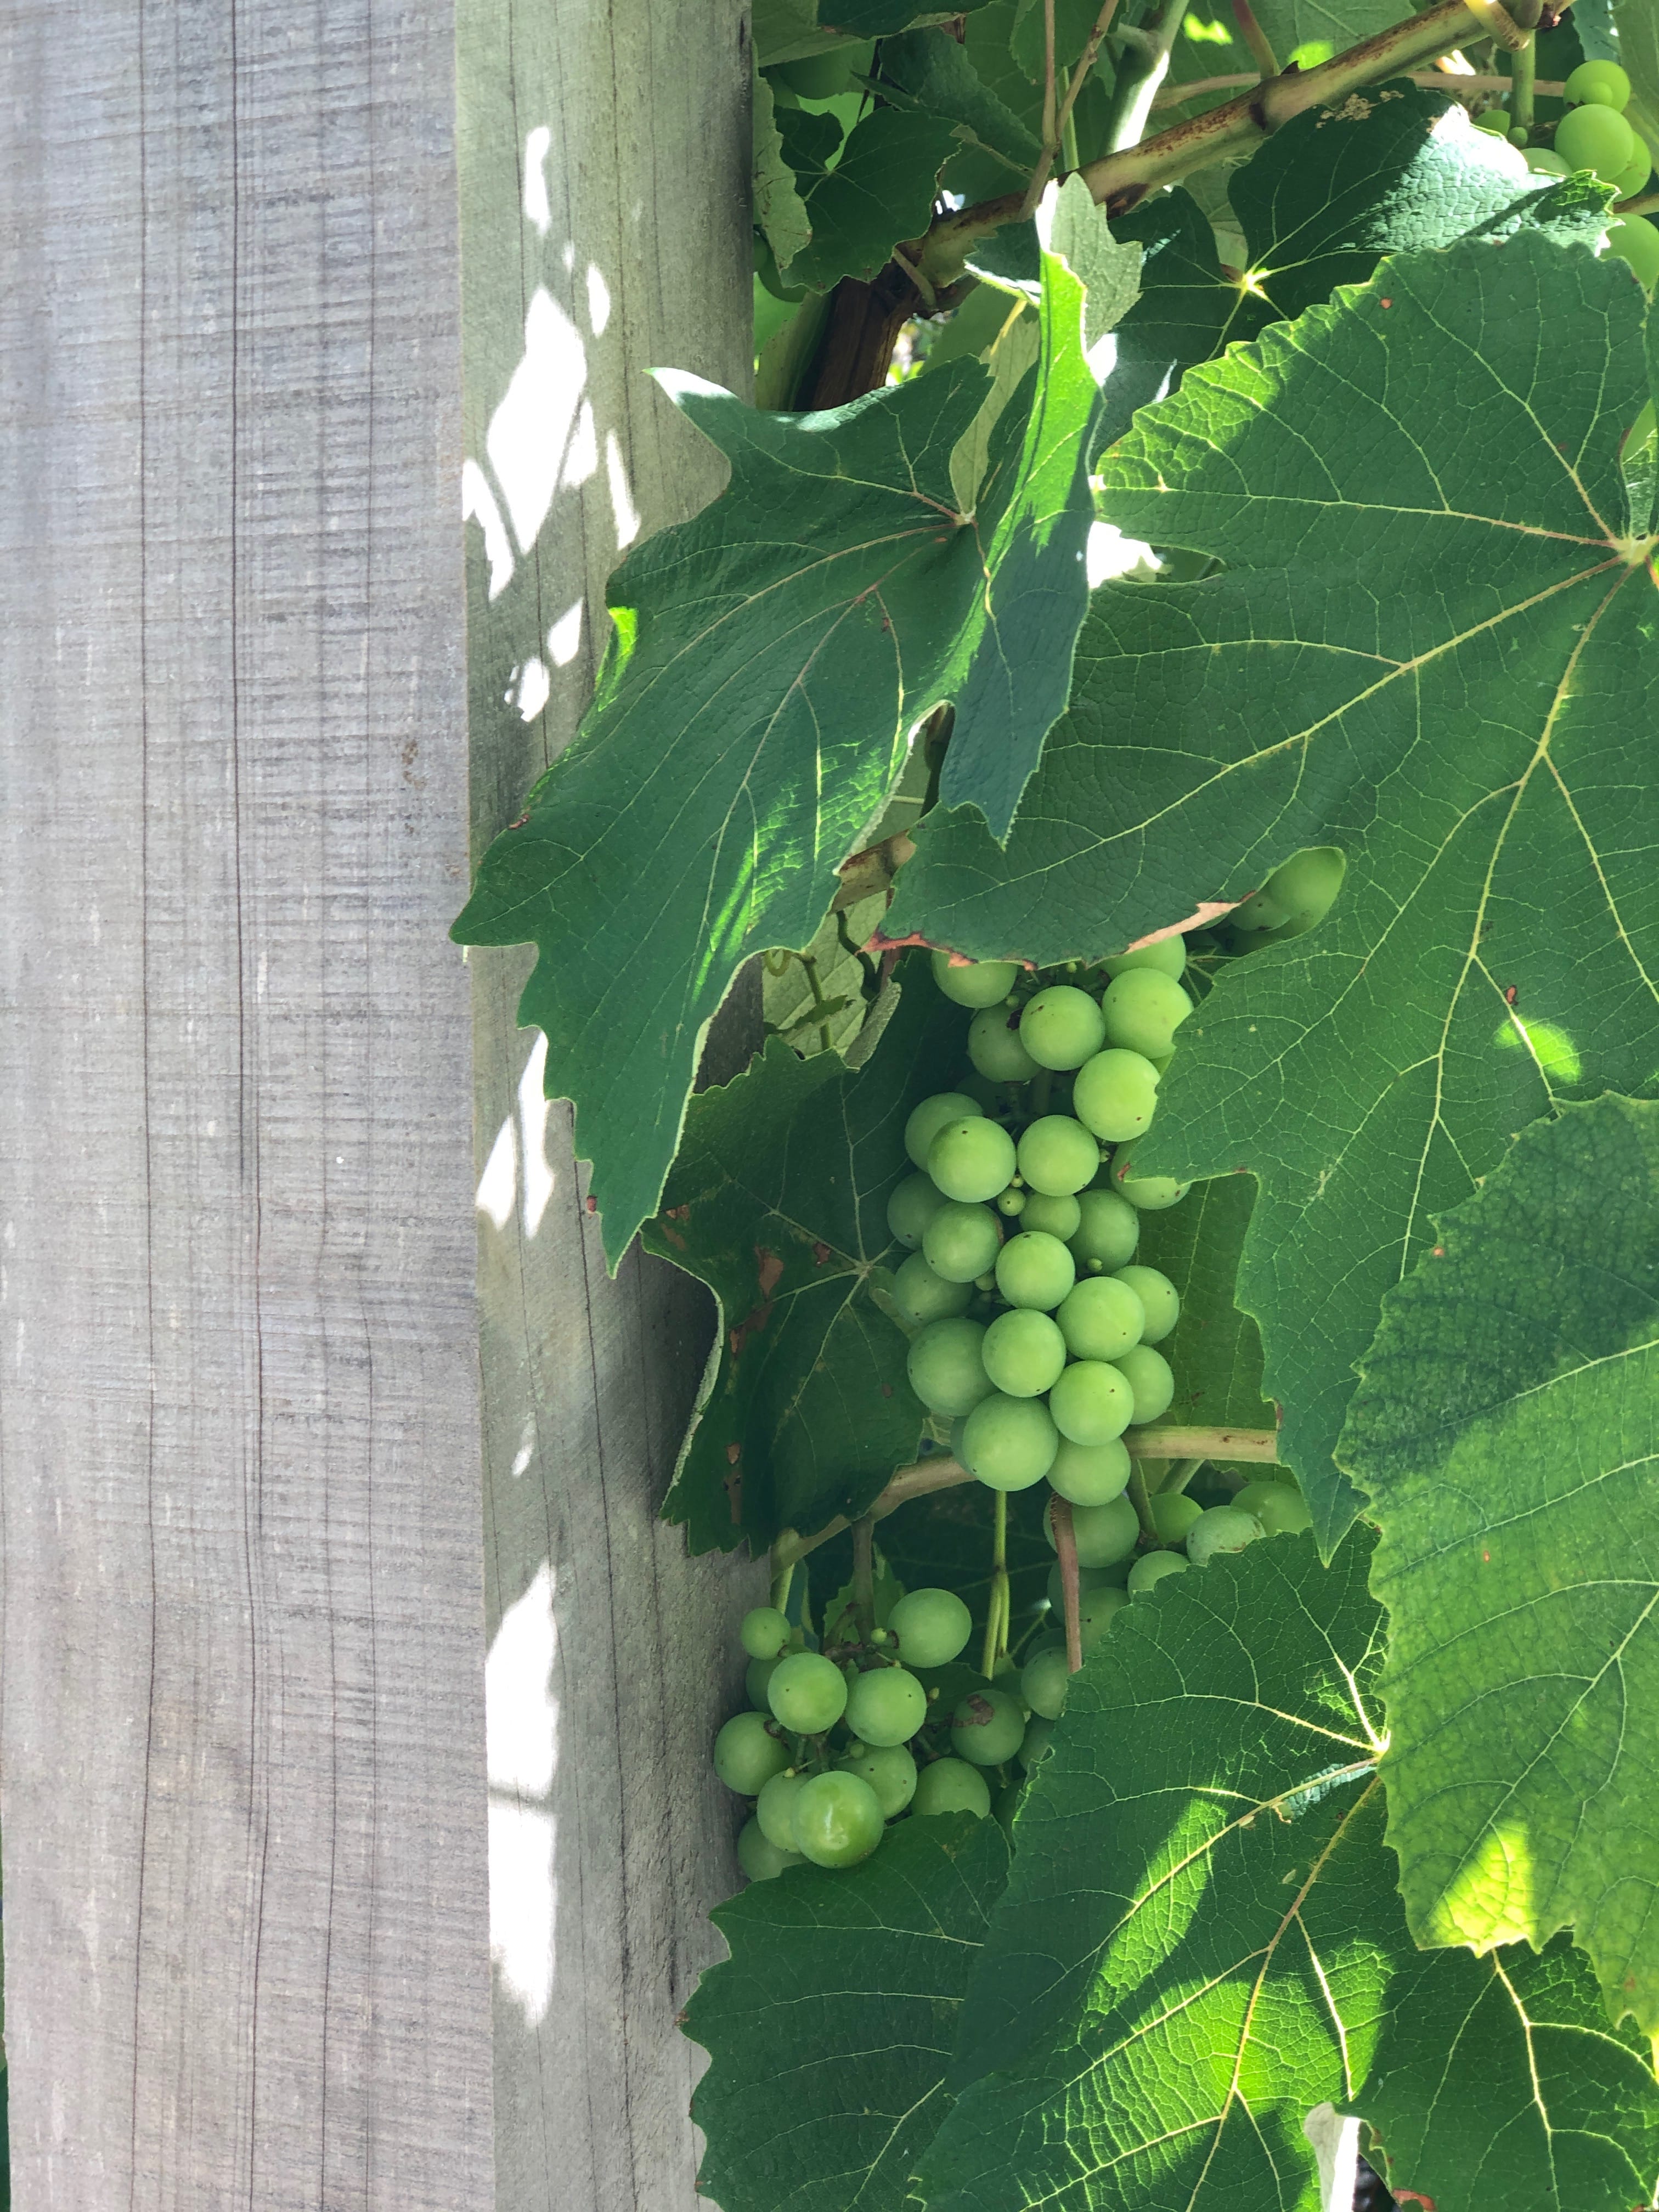 Growing grapes on wires, Kirsten Sach Landscapes